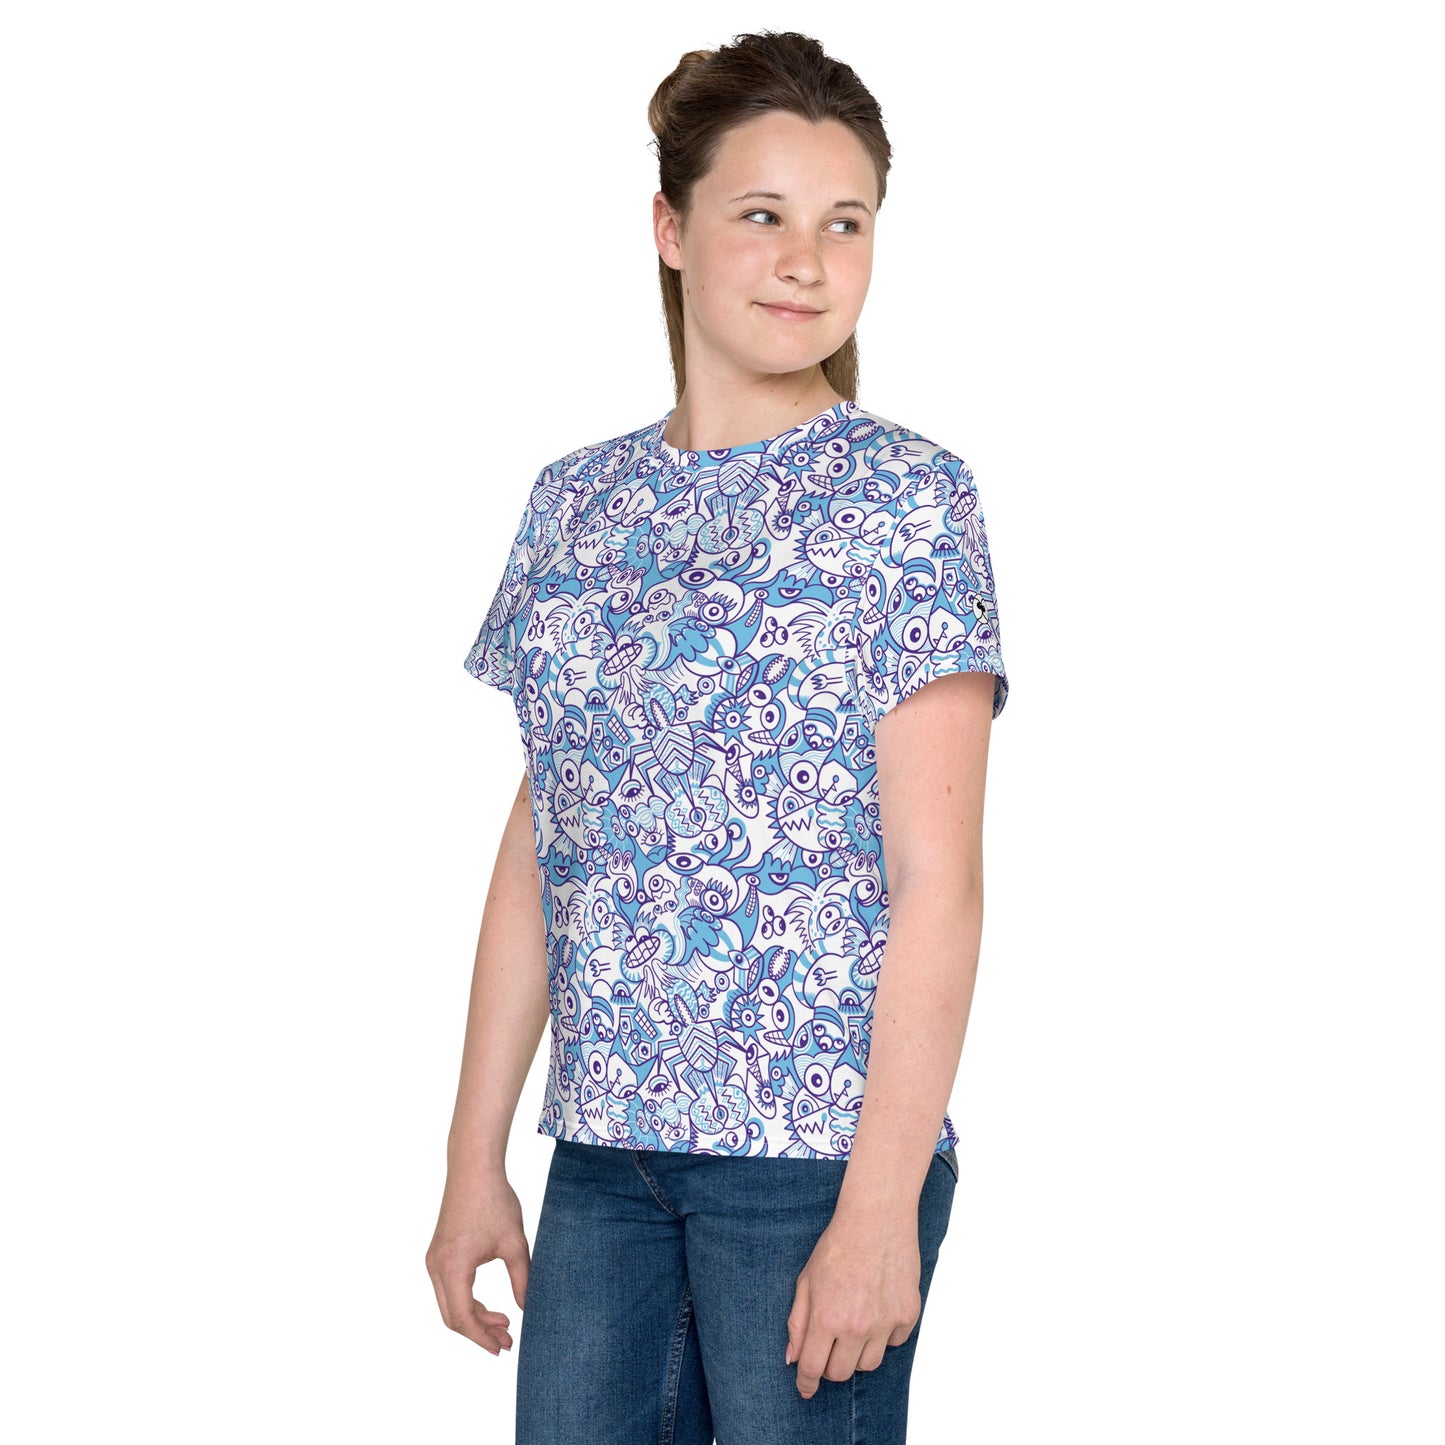 Whimsical Blue Doodle Critterscape pattern design - Youth crew neck t-shirt. Side view